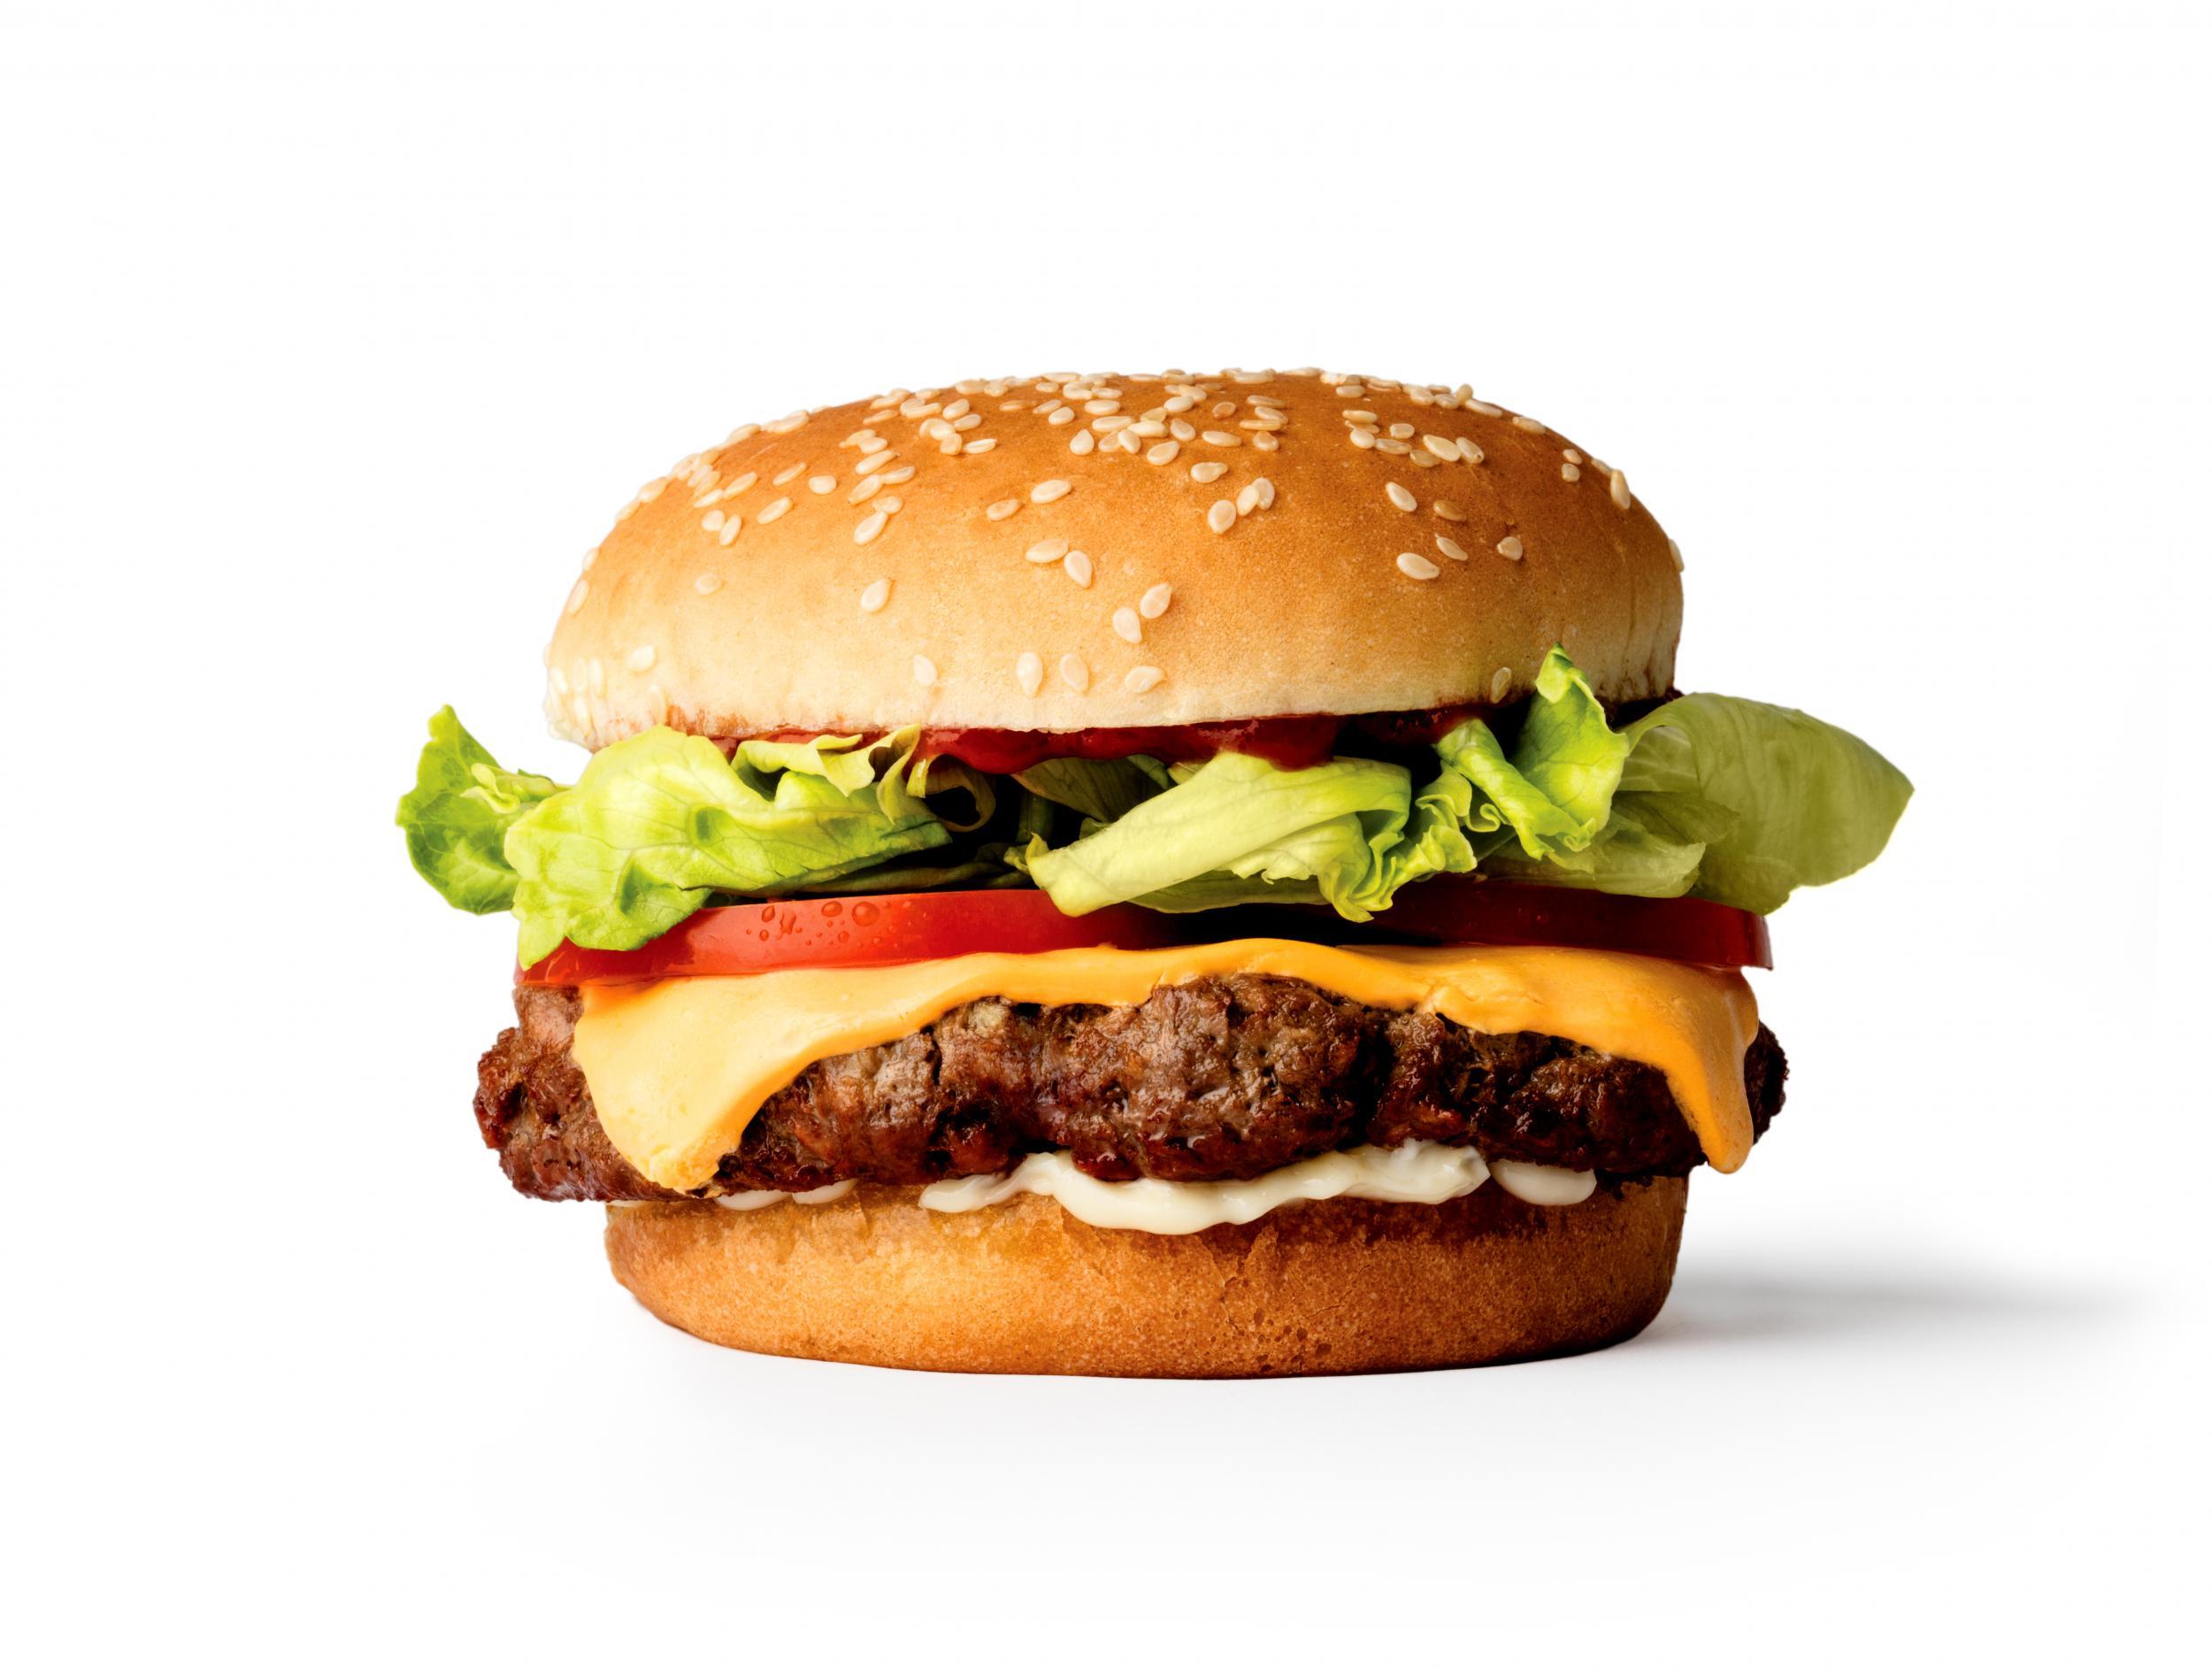 The Impossible Burger was built in a lab (Impossible Burger)